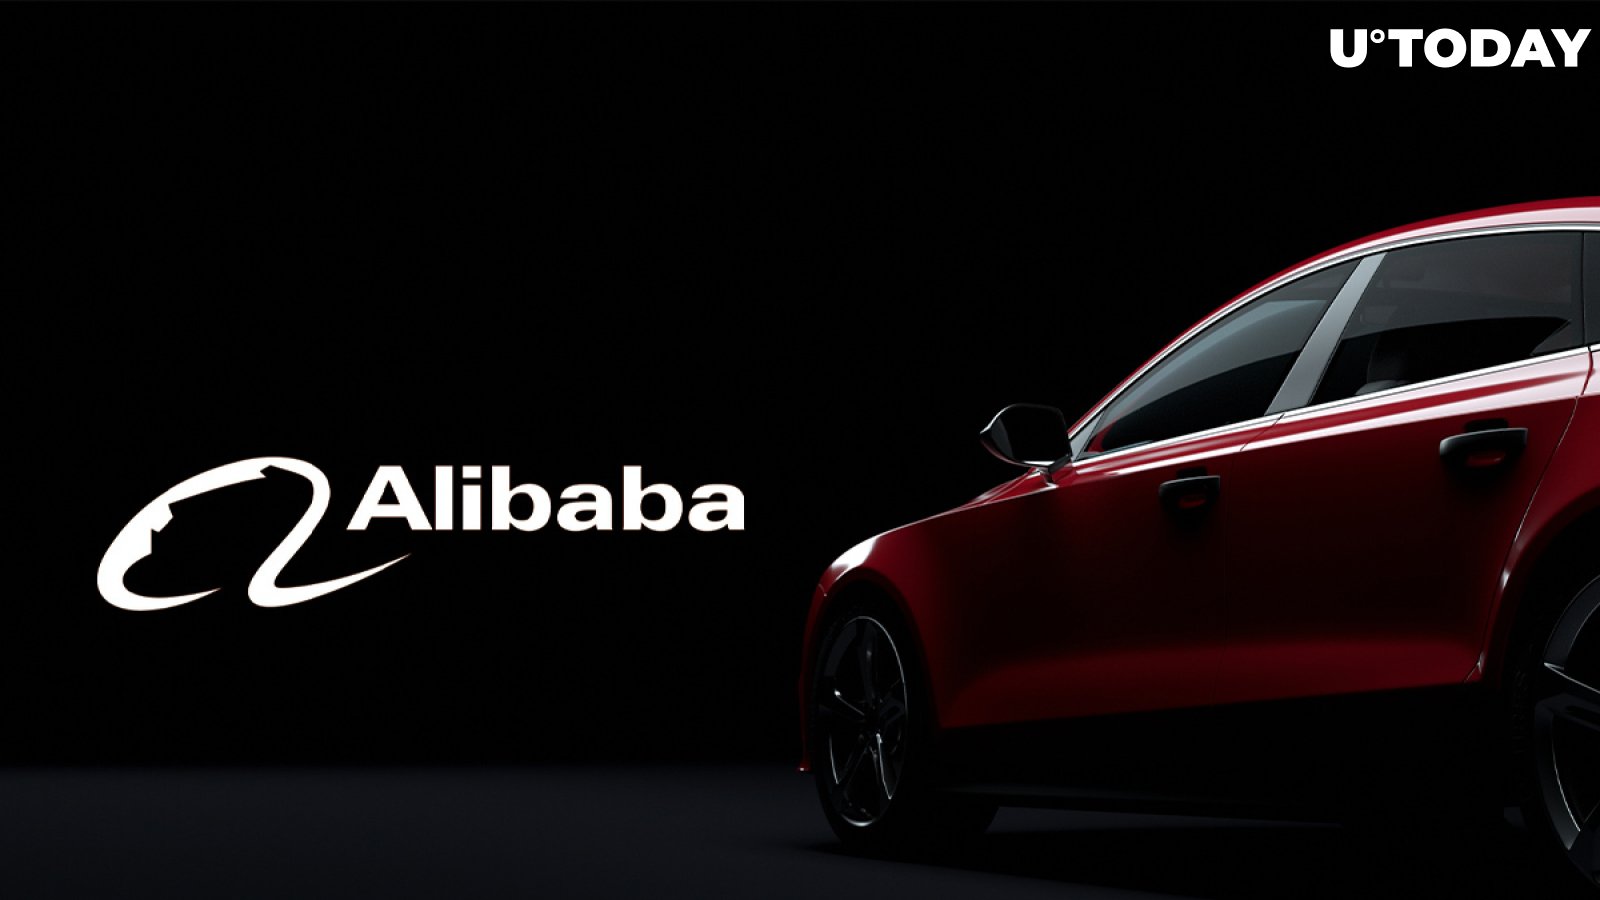 Alibaba Invests in Company That Allows Mining By Driving Your Car